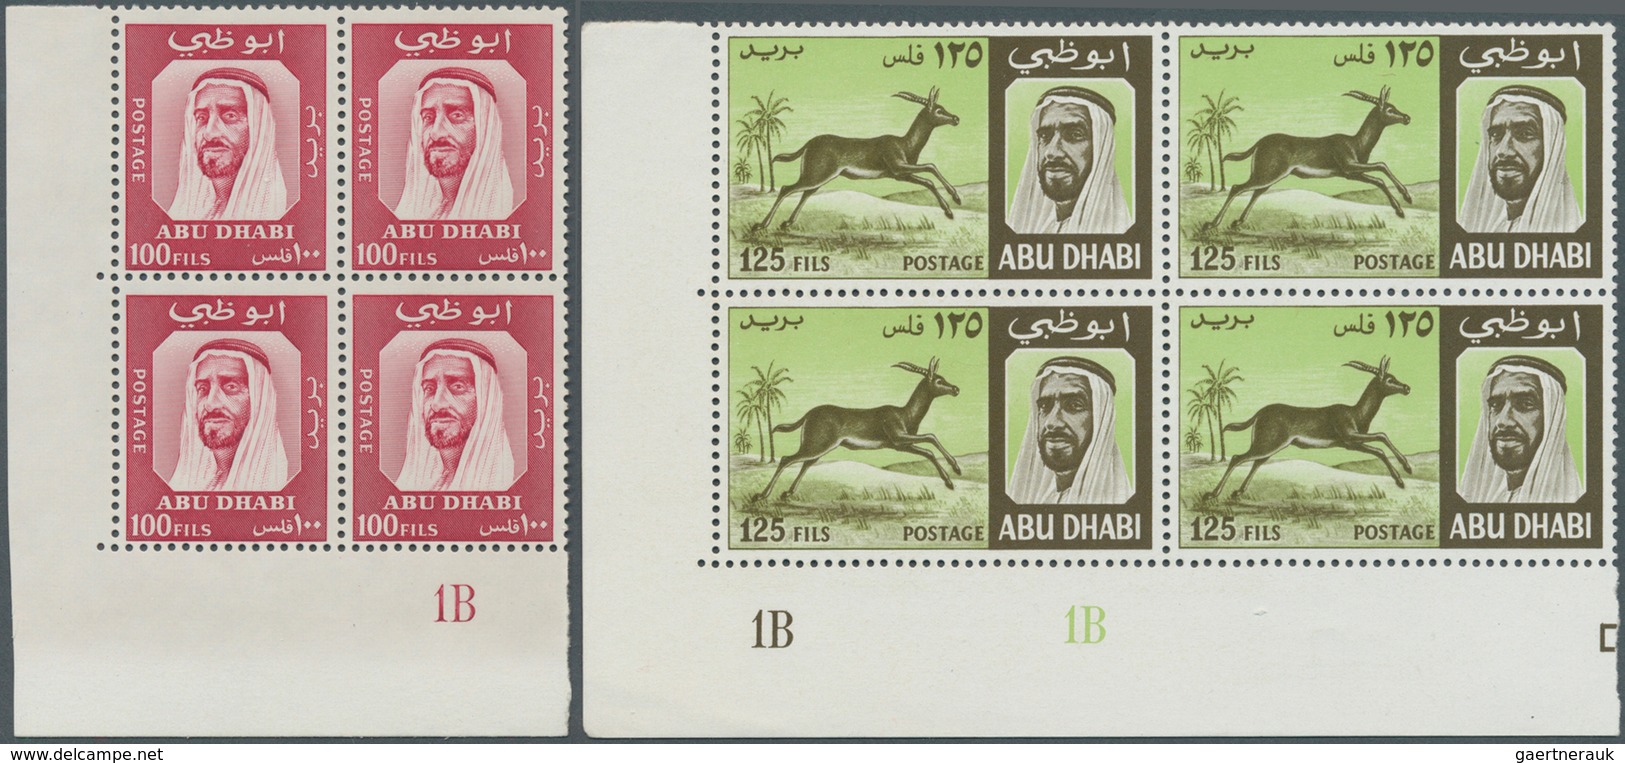 08001 Abu Dhabi: 1967, Definitives, 100f. To 1d., Five Top Values Each As Plate Block From The Lower Left - Abu Dhabi